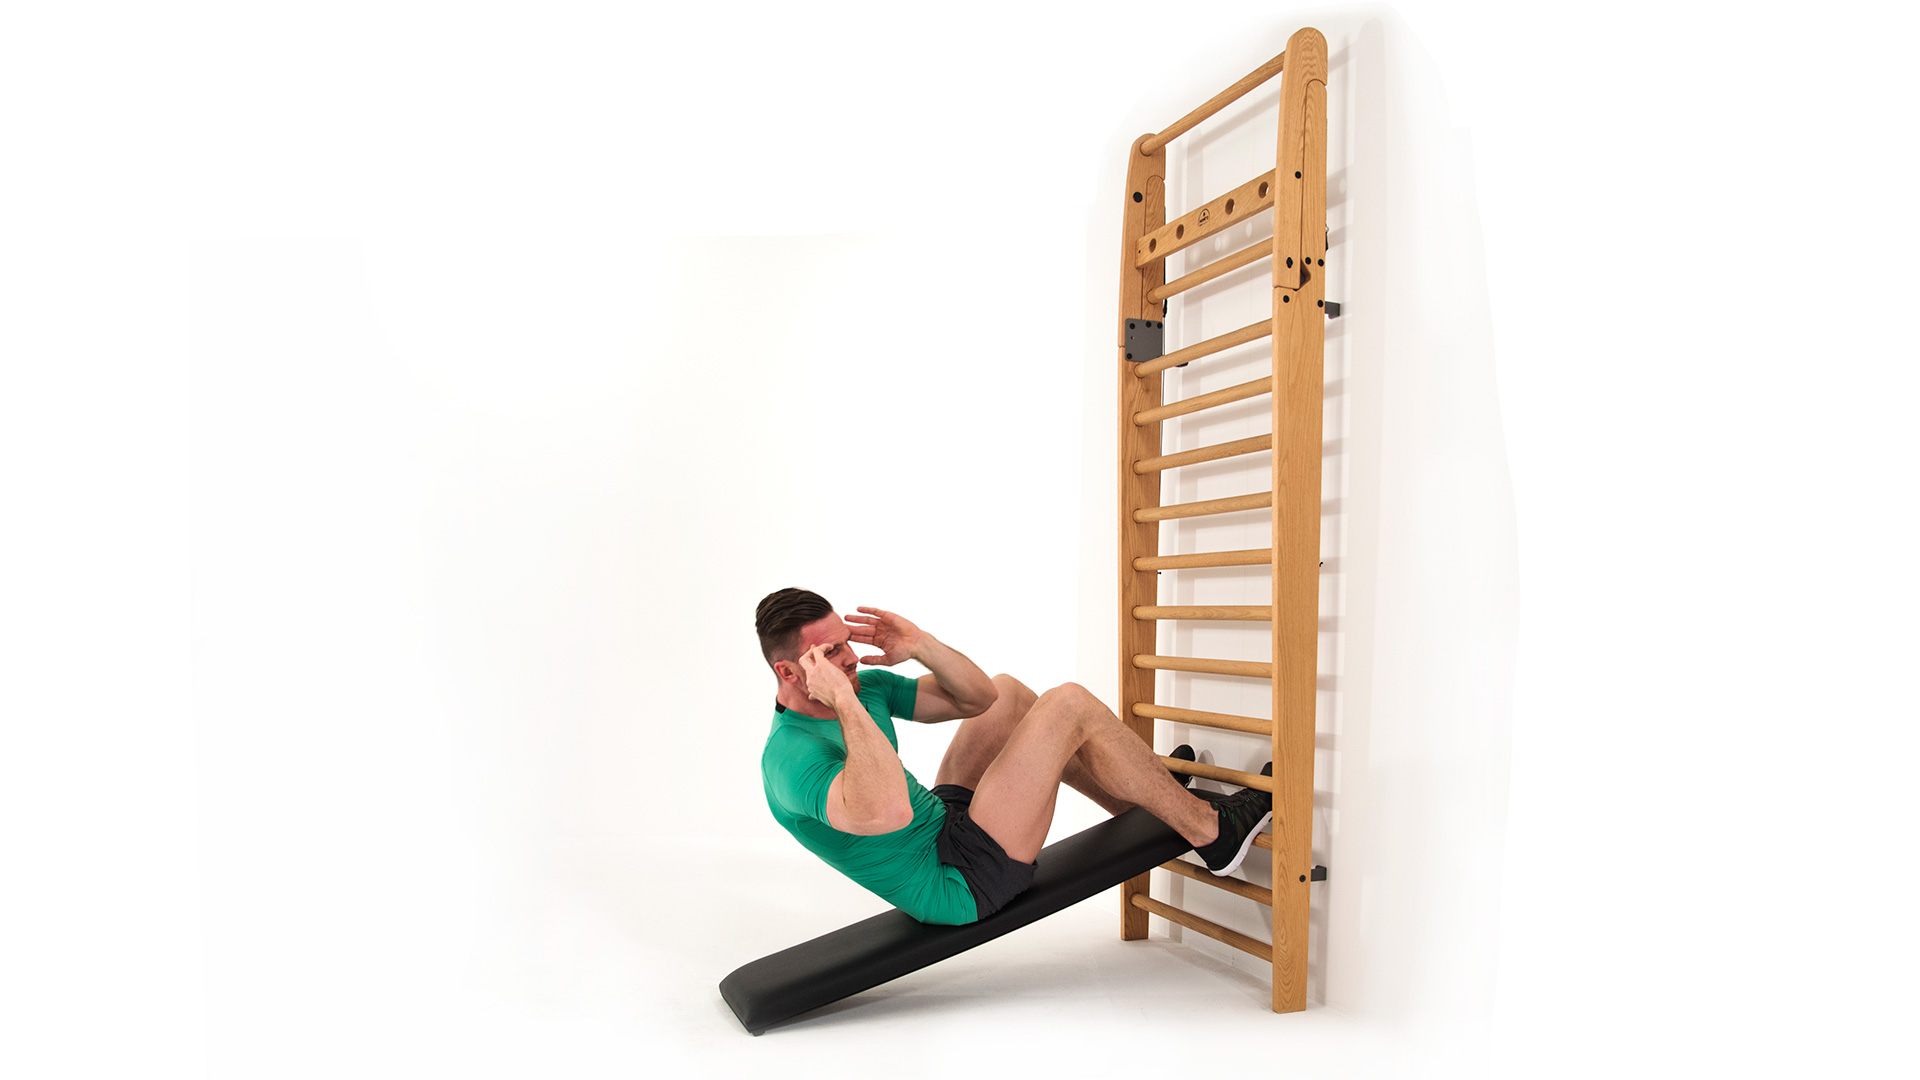 NOHrD WallBars - ideal for all areas of fitness training